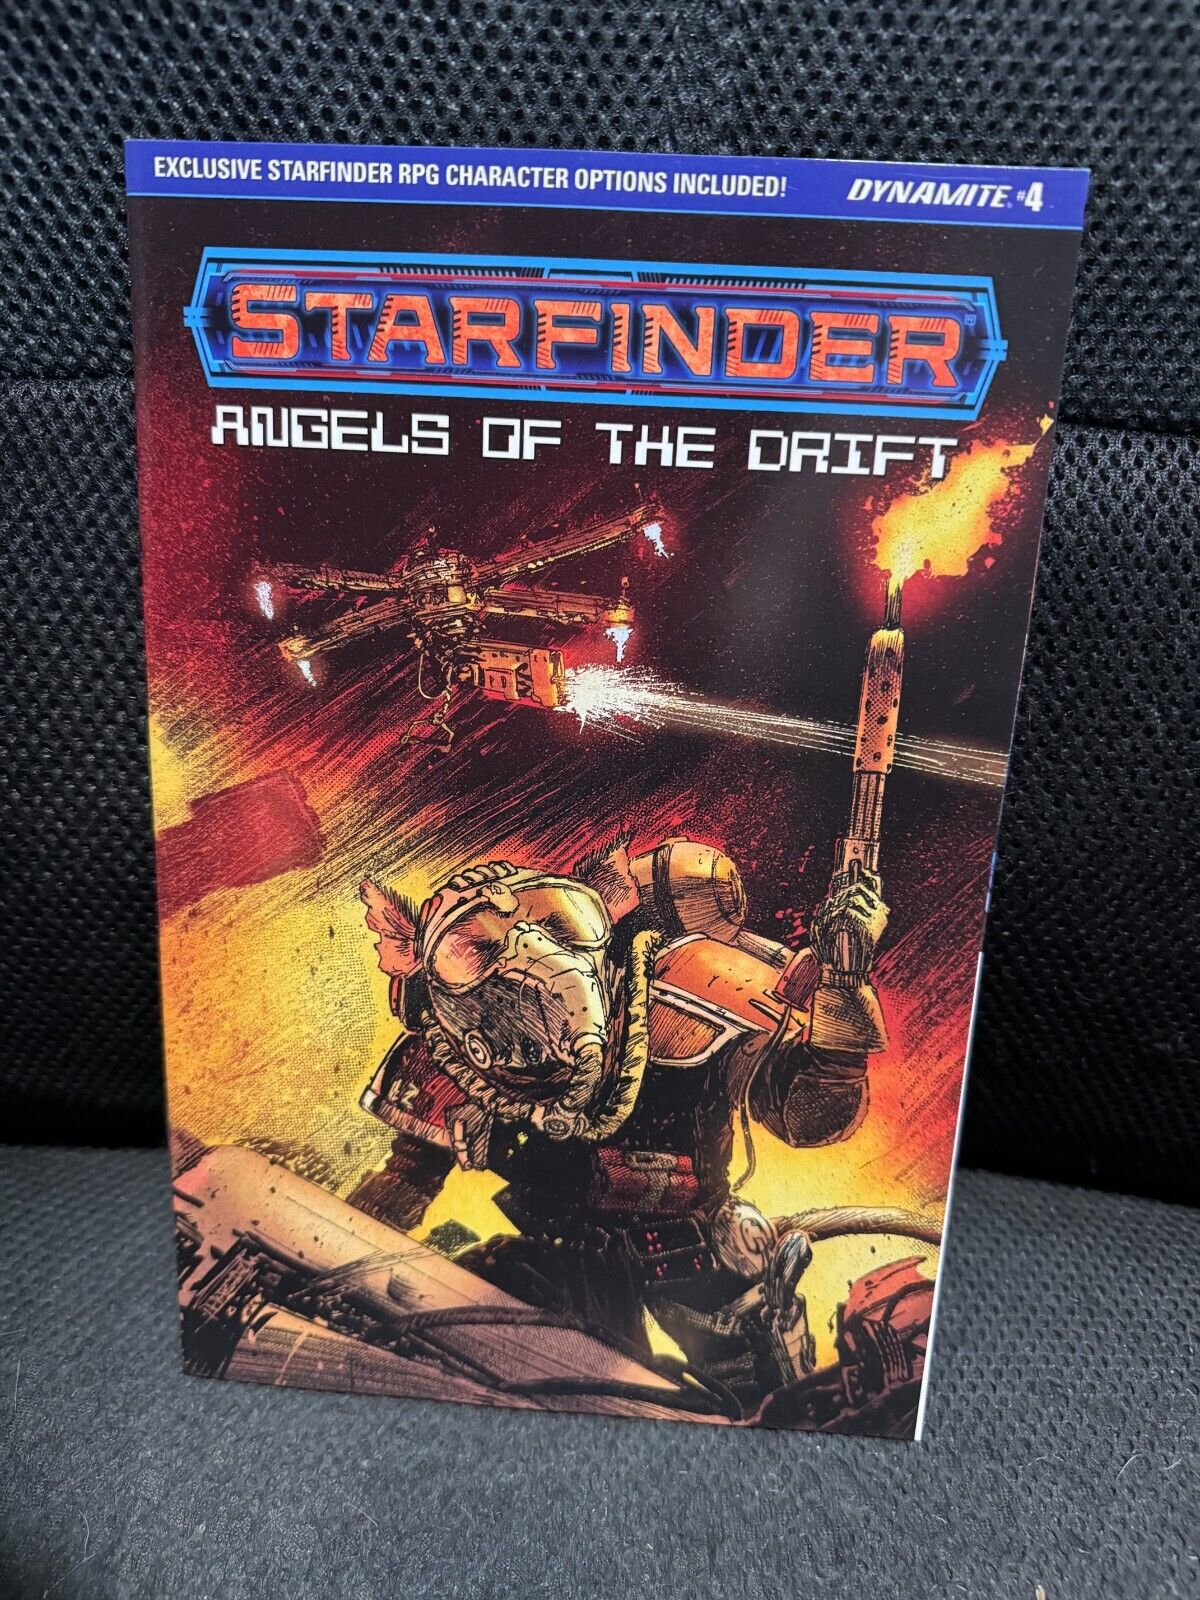 Starfinder: Angels of the Drift #4  |   Card Stock Cover  B   |   NM  NEW